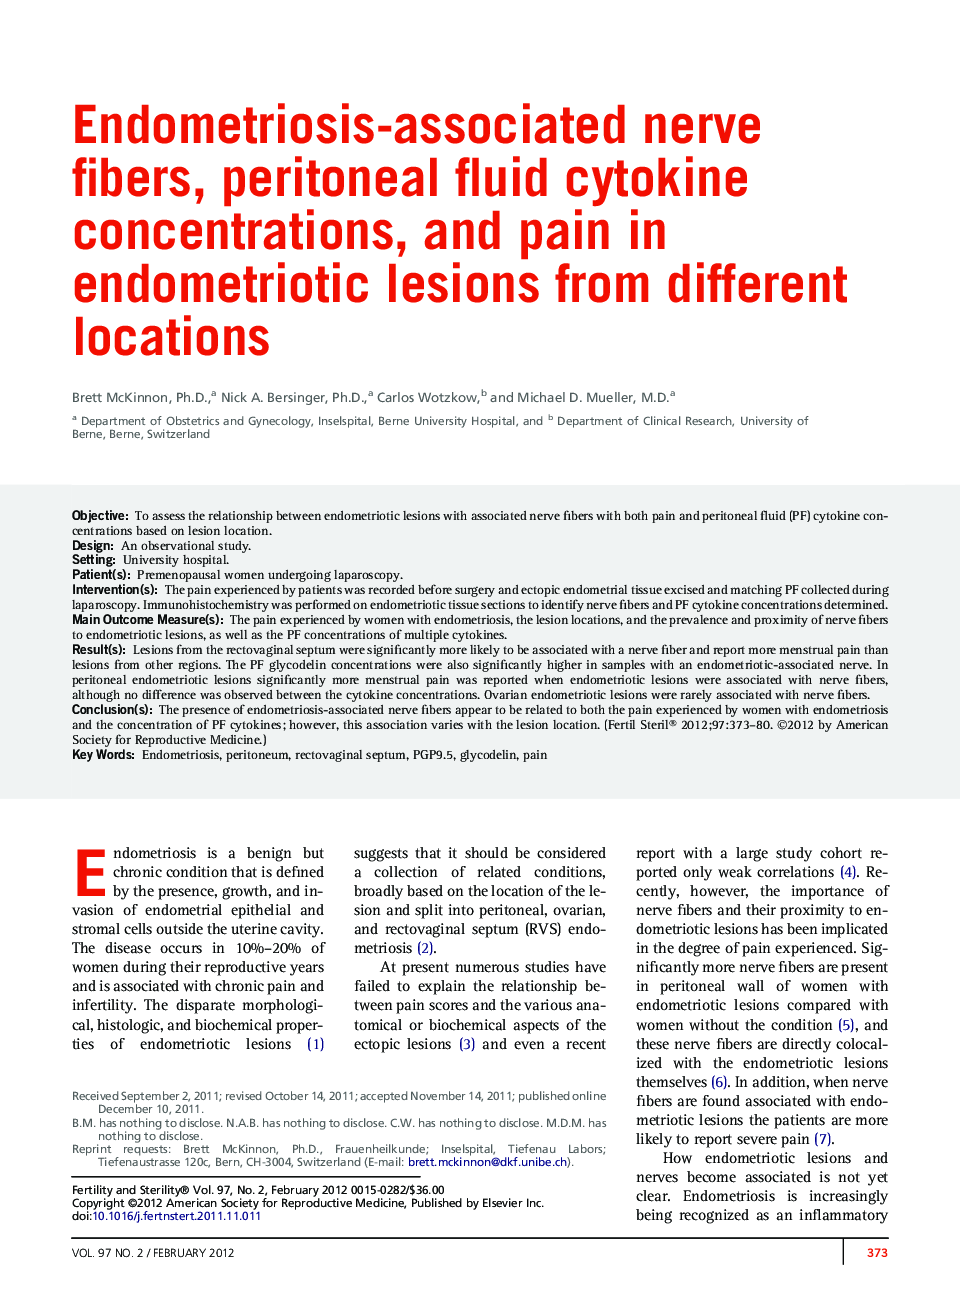 Endometriosis-associated nerve fibers, peritoneal fluid cytokine concentrations, and pain in endometriotic lesions from different locations 